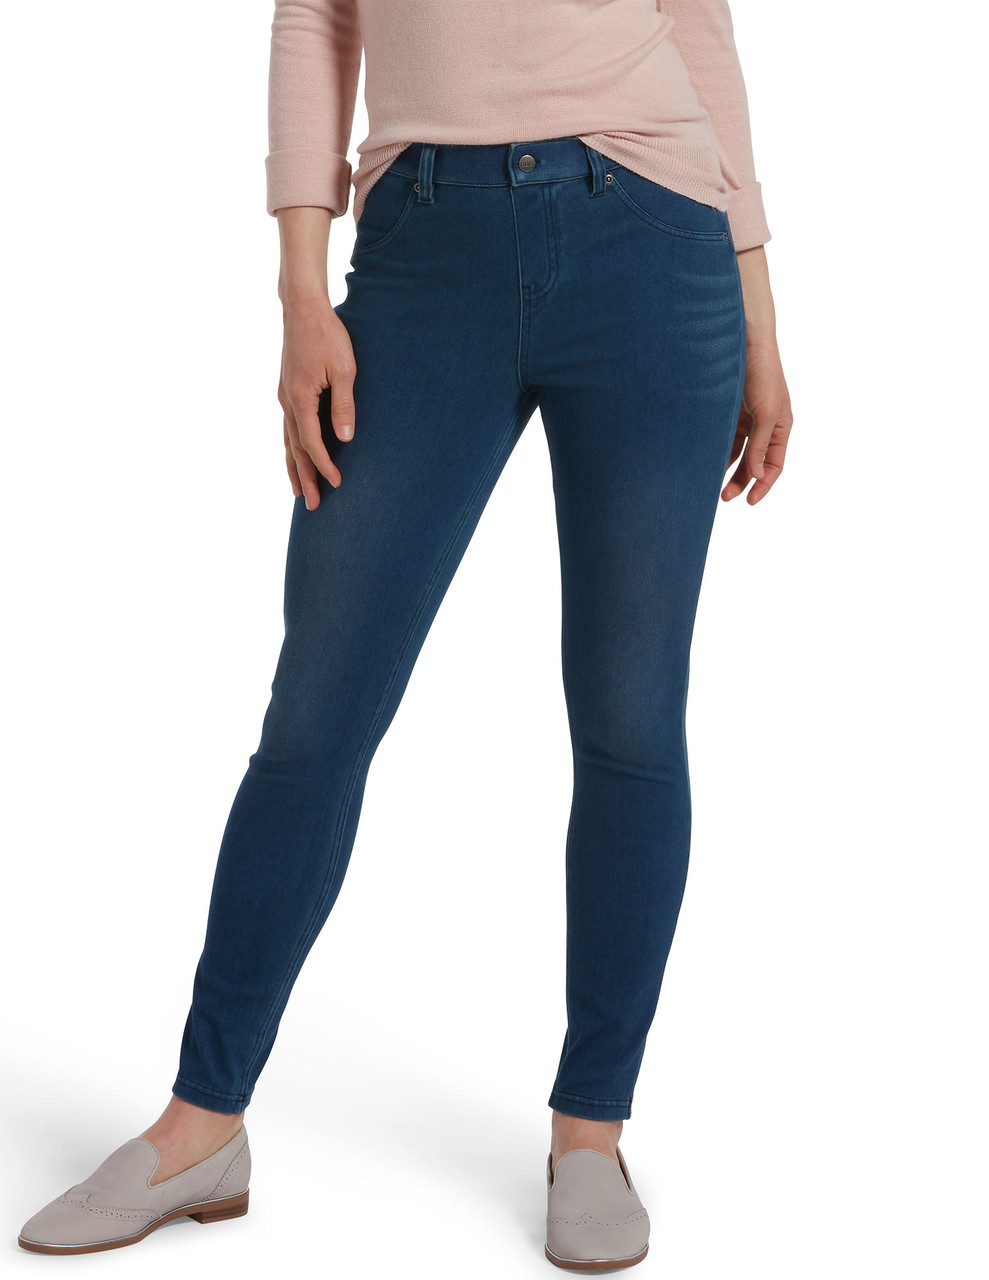 HUE Women's Essential Denim Leggings, Stone Acid Wash, X-Small : Buy Online  at Best Price in KSA - Souq is now : Fashion